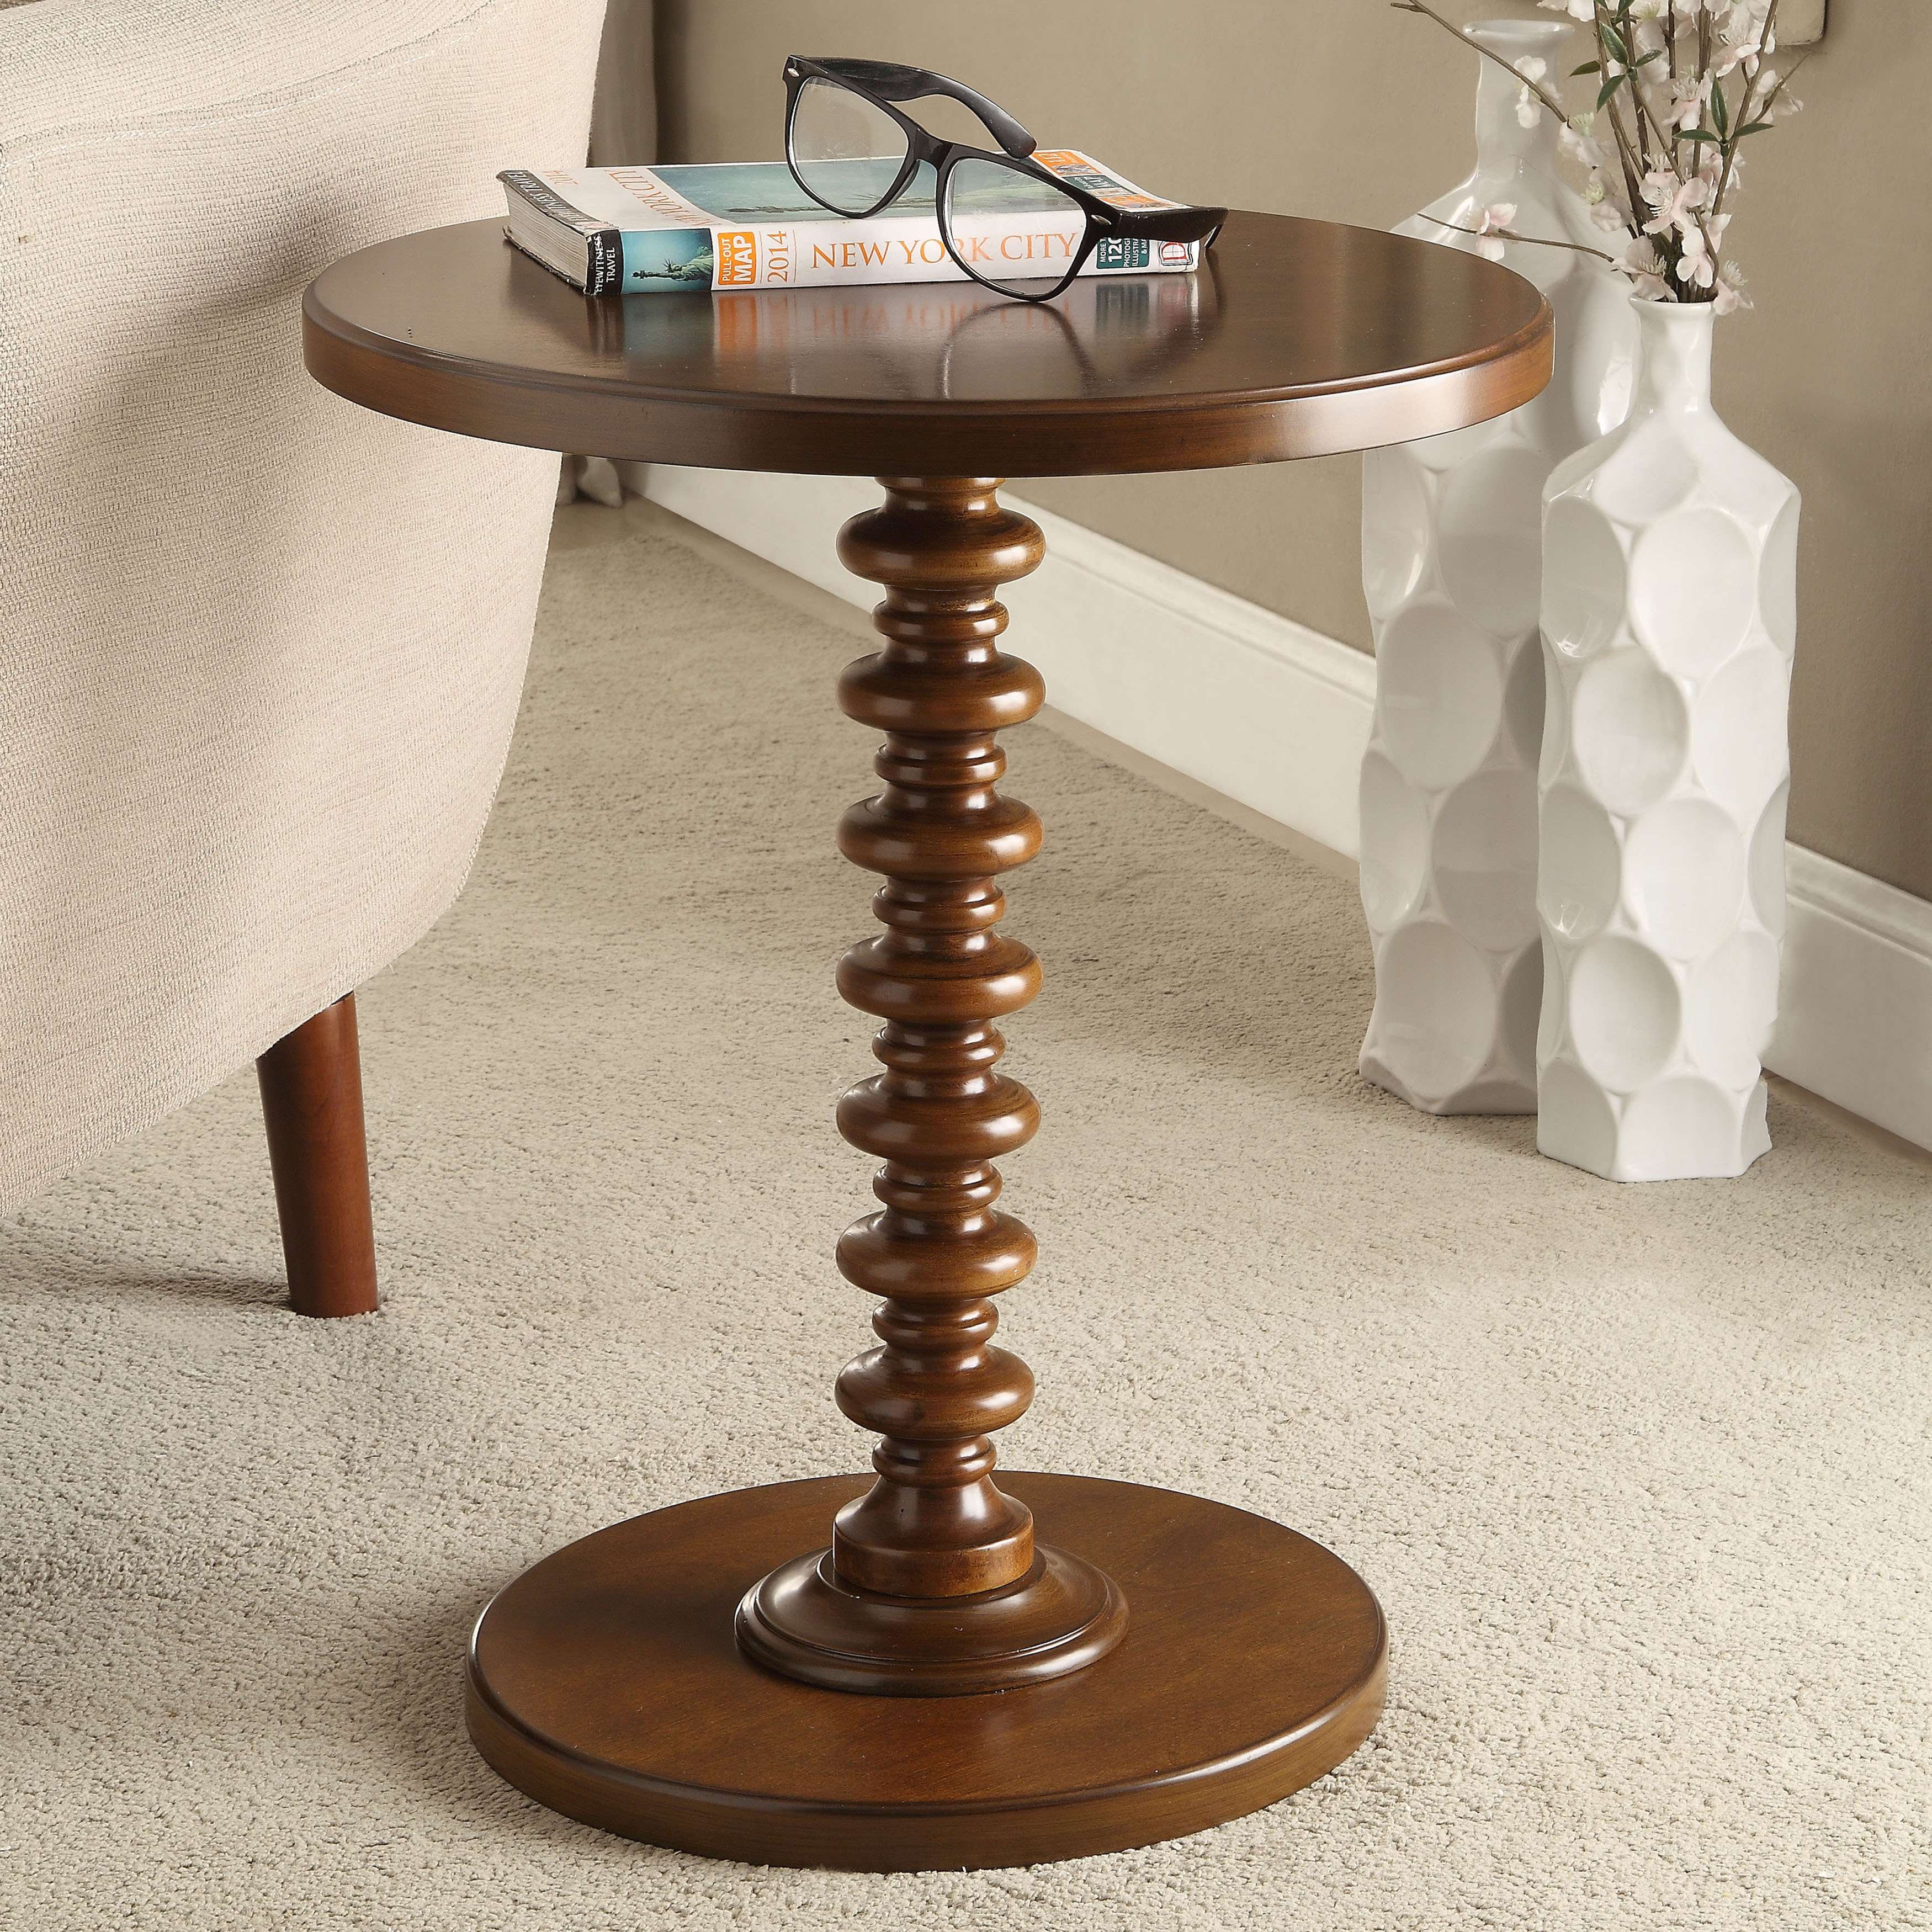 acme furniture acton spindle accent table free shipping today wood kirkland pier imports patio round mats spring haven chairside agate side winsome end home decor art cream chair